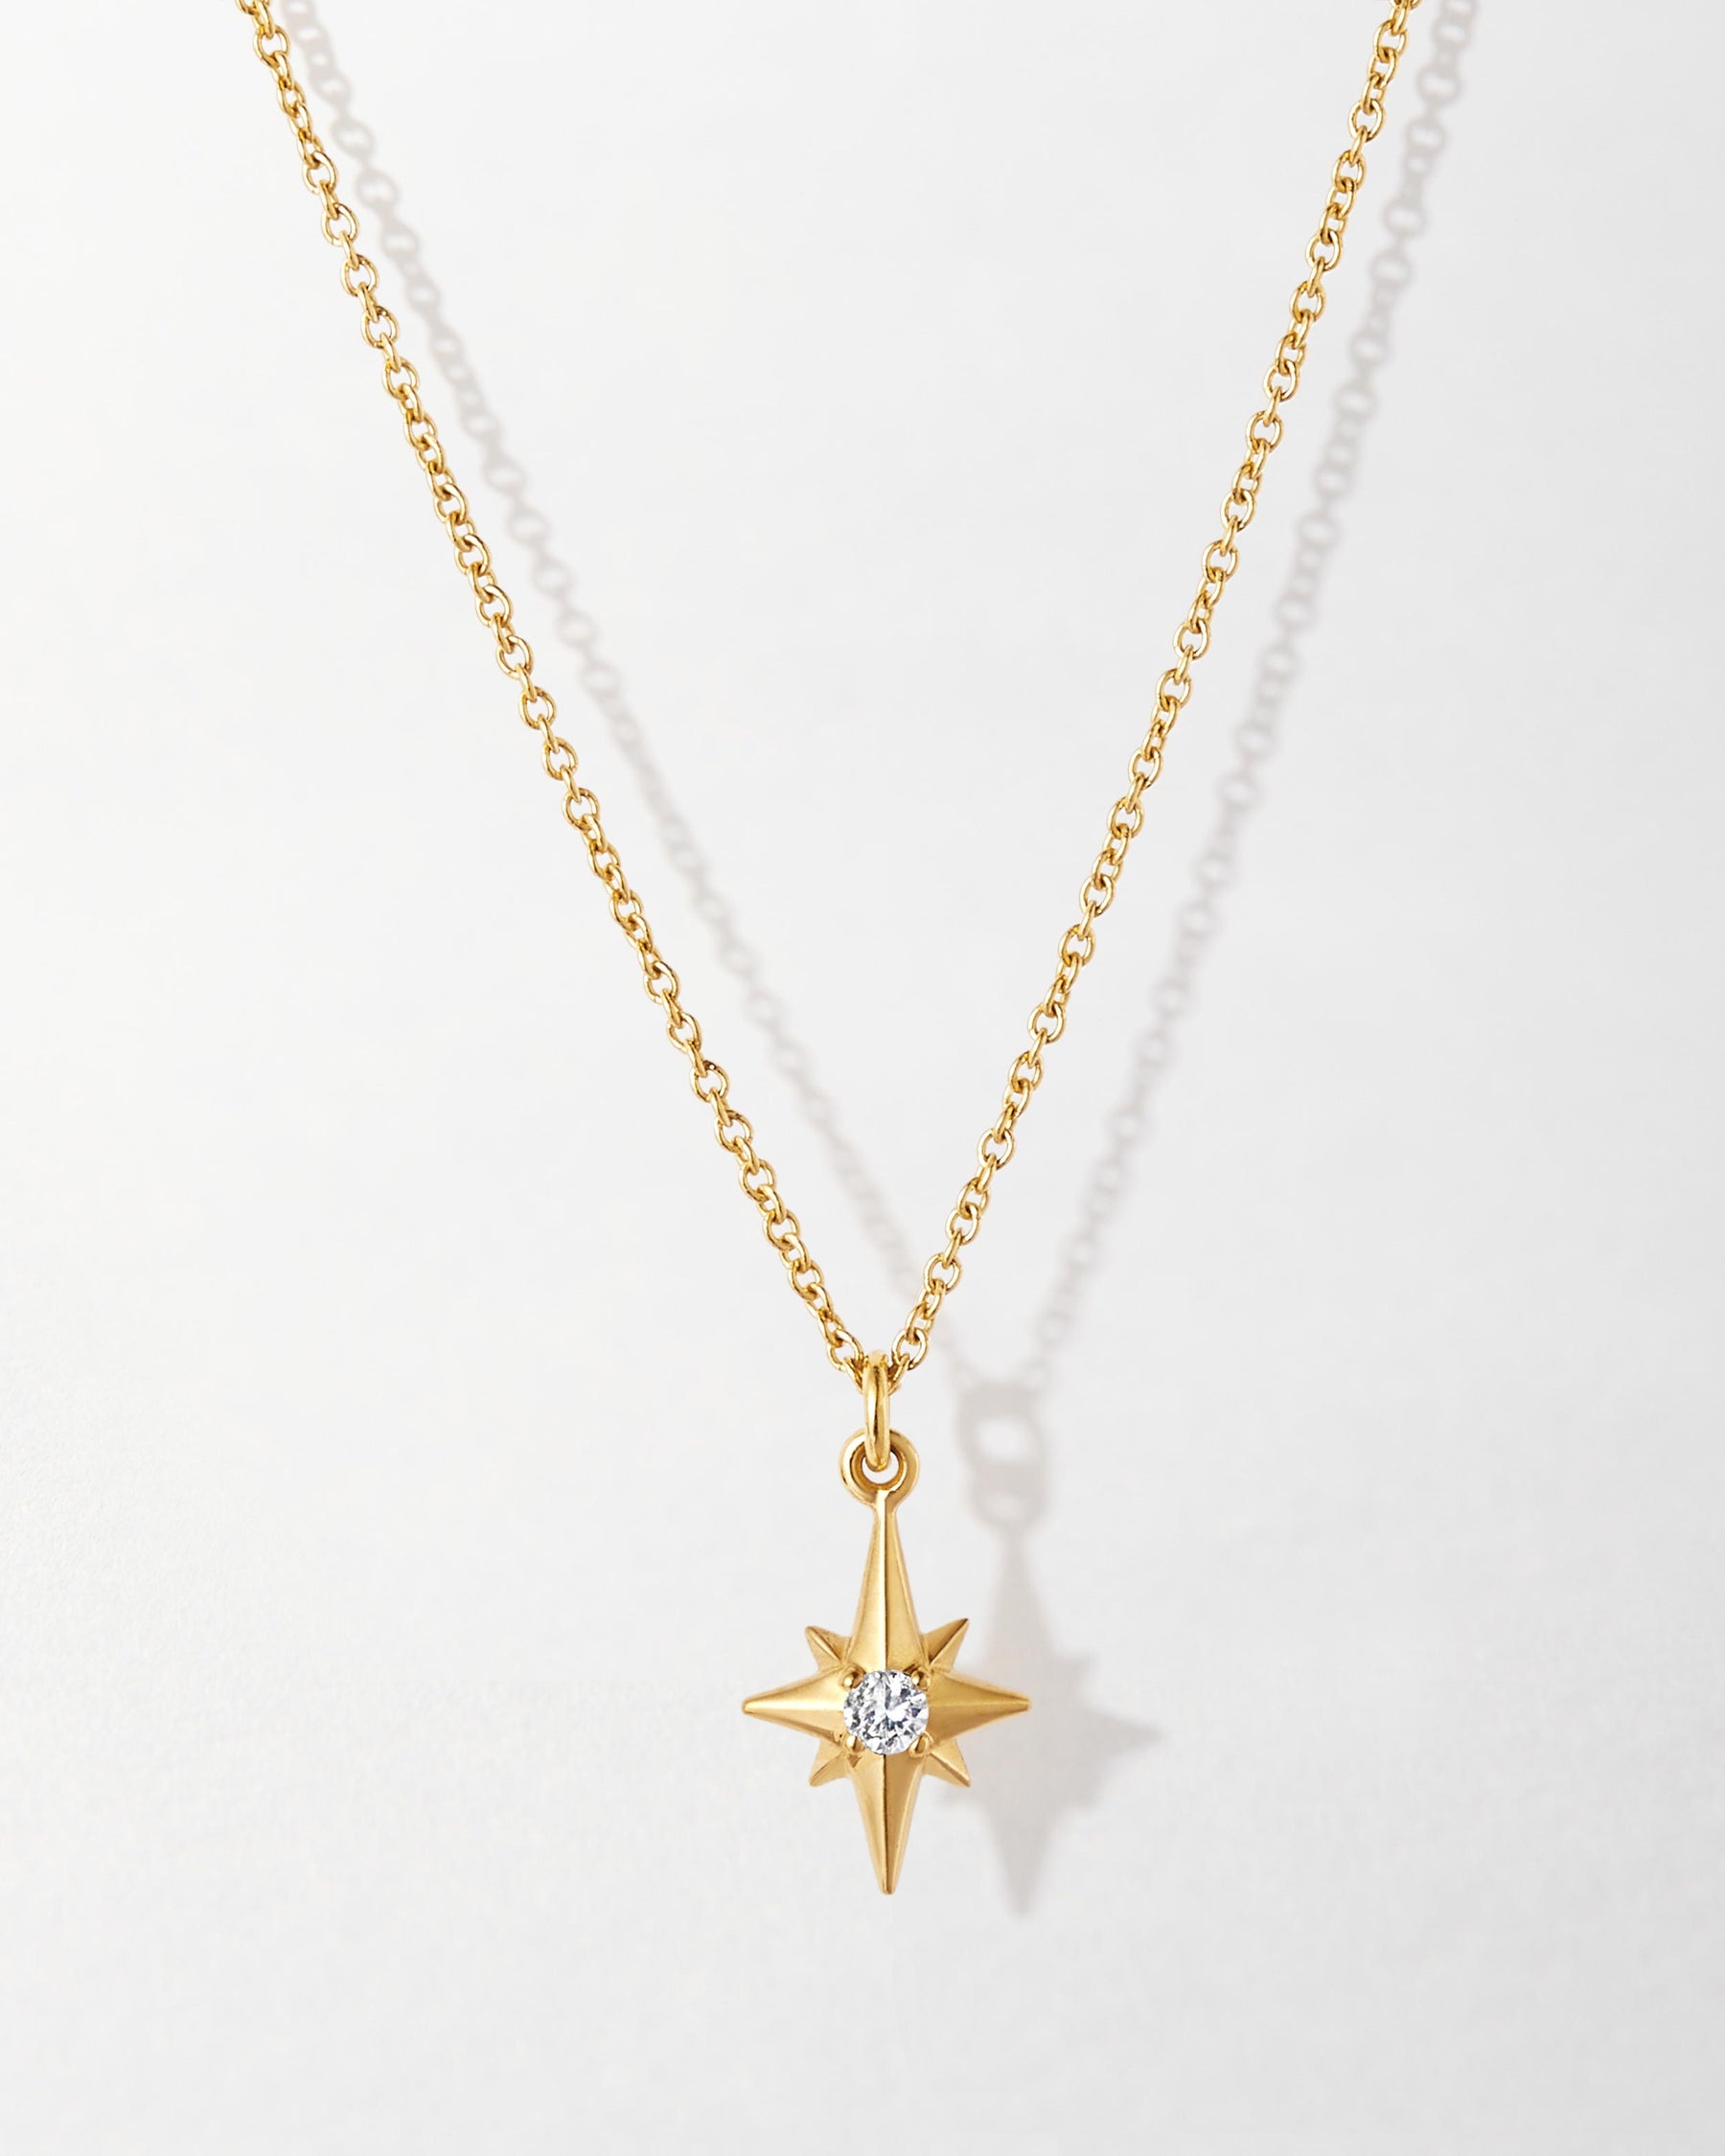 Amazon.com: Pole Star Necklace,14k Solid Gold North Star Necklace, Pole Star  Pendant, North Star Pendant, Christmas Gift, Valentines Day Gift (45, White  Gold) : Handmade Products